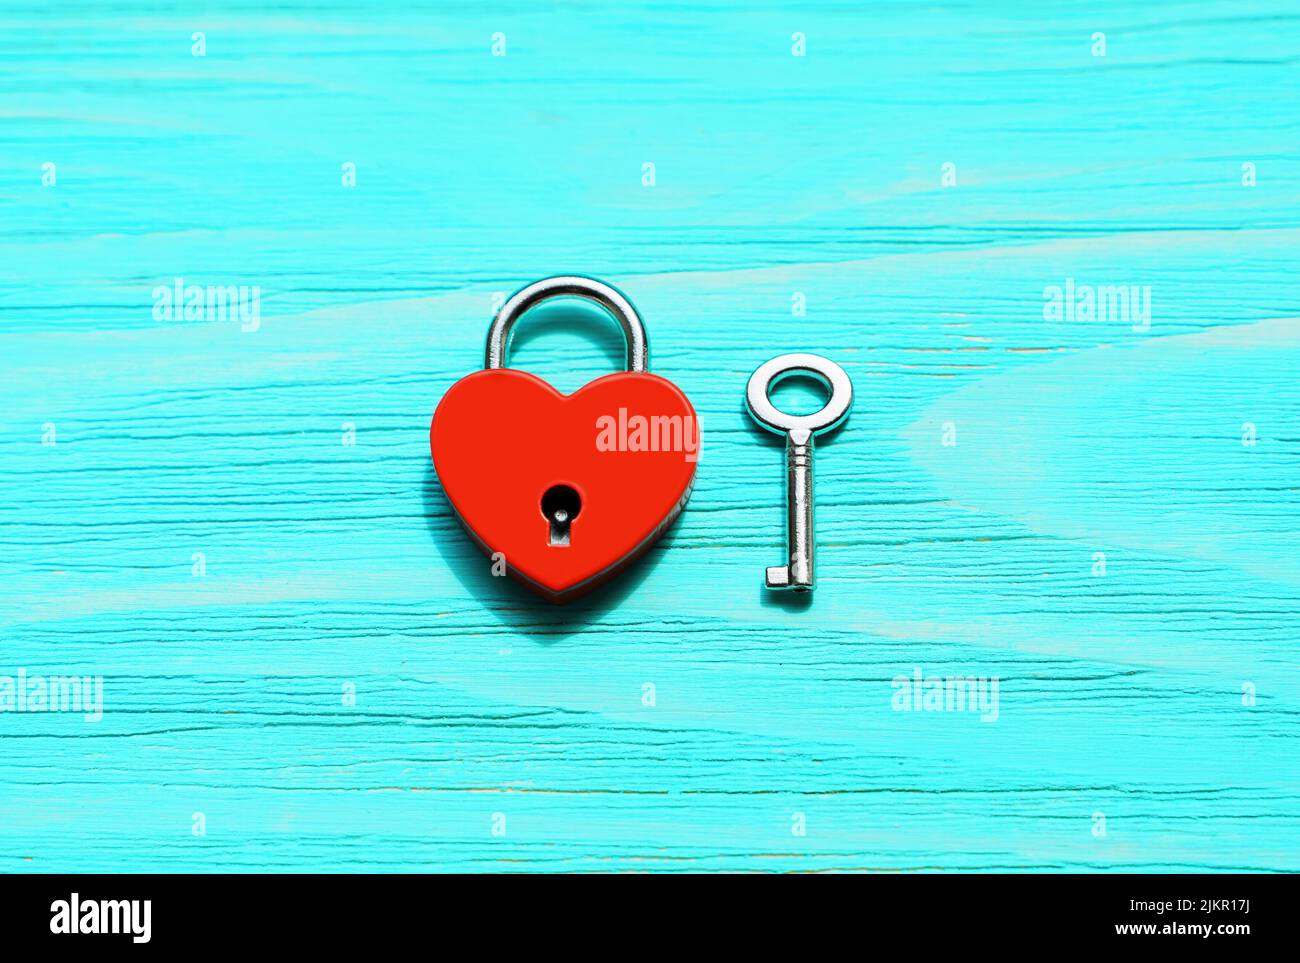 Red heart-shaped padlock and silver-toned skeleton key on a blue wooden background with copy space. Strong romantic relationships concept. Stock Photo